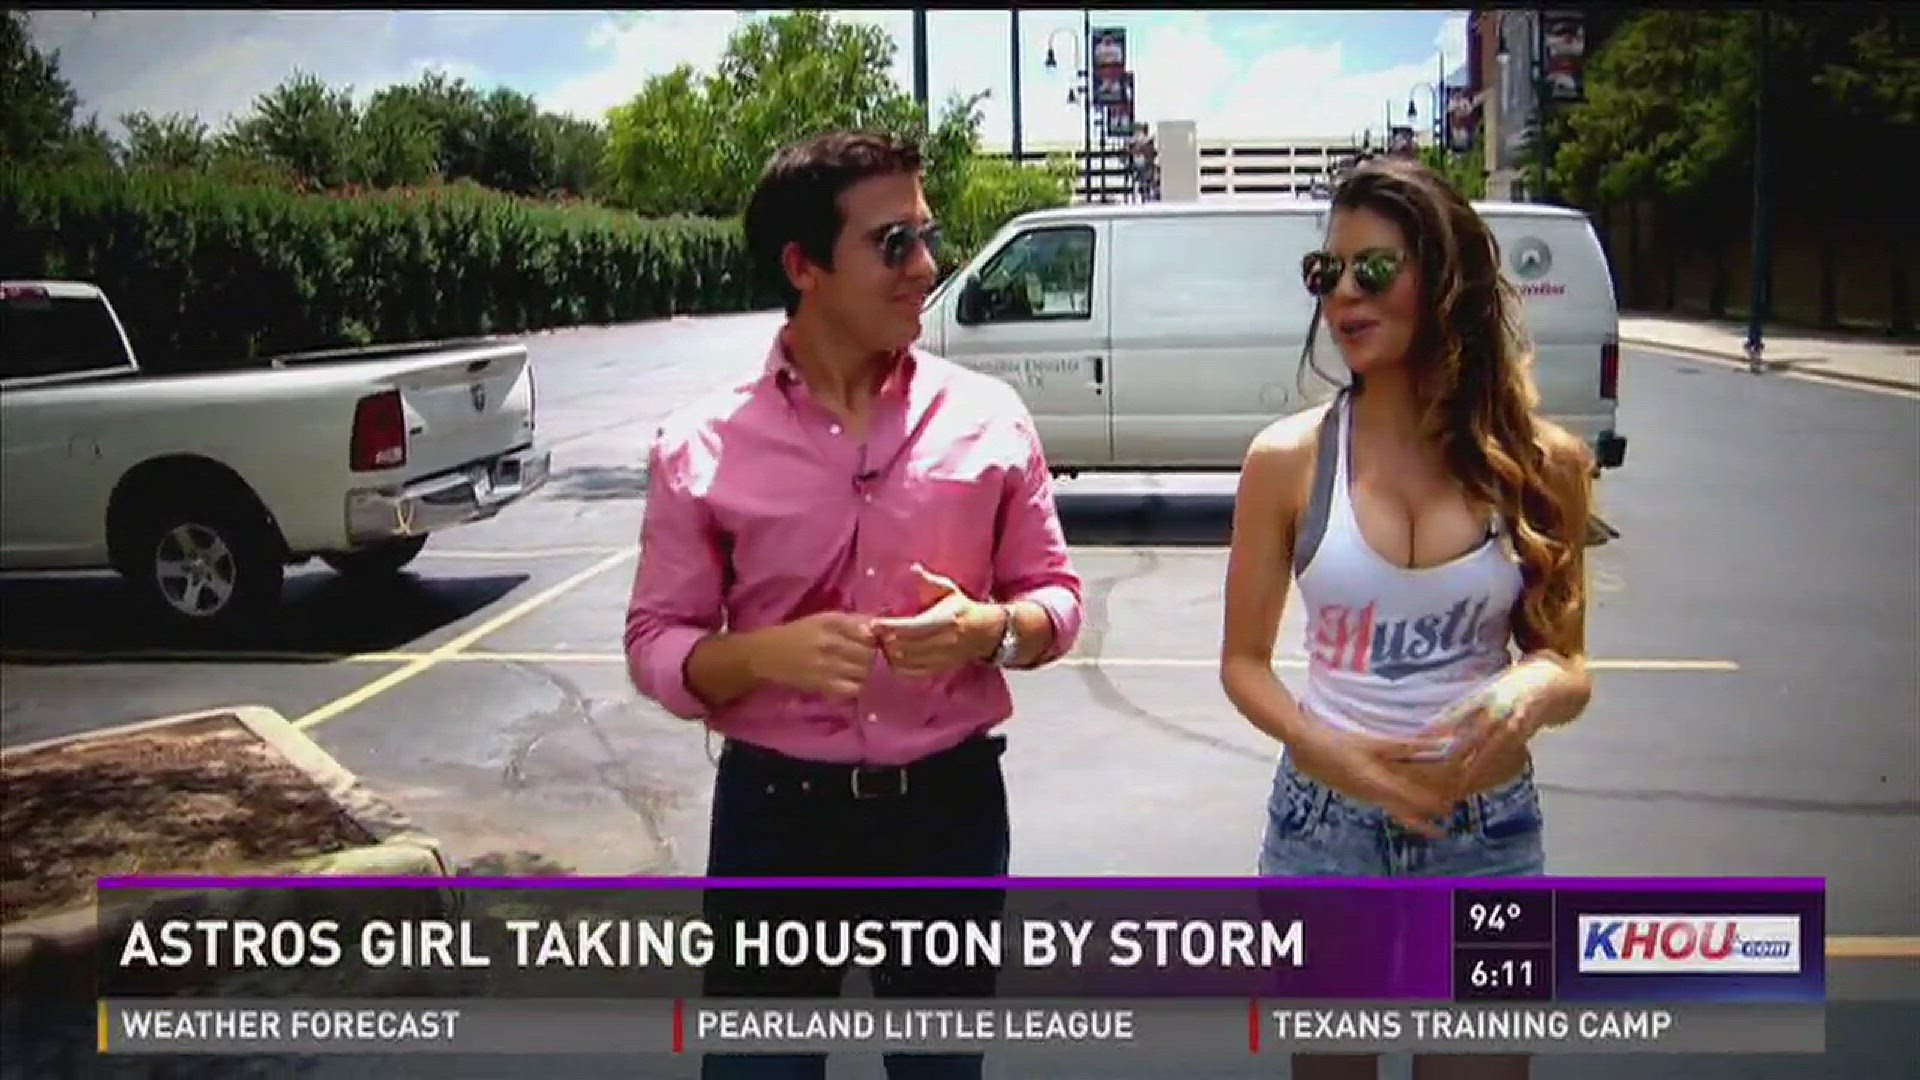 Astros Girl' Terann Hilow: What now for the sudden star?